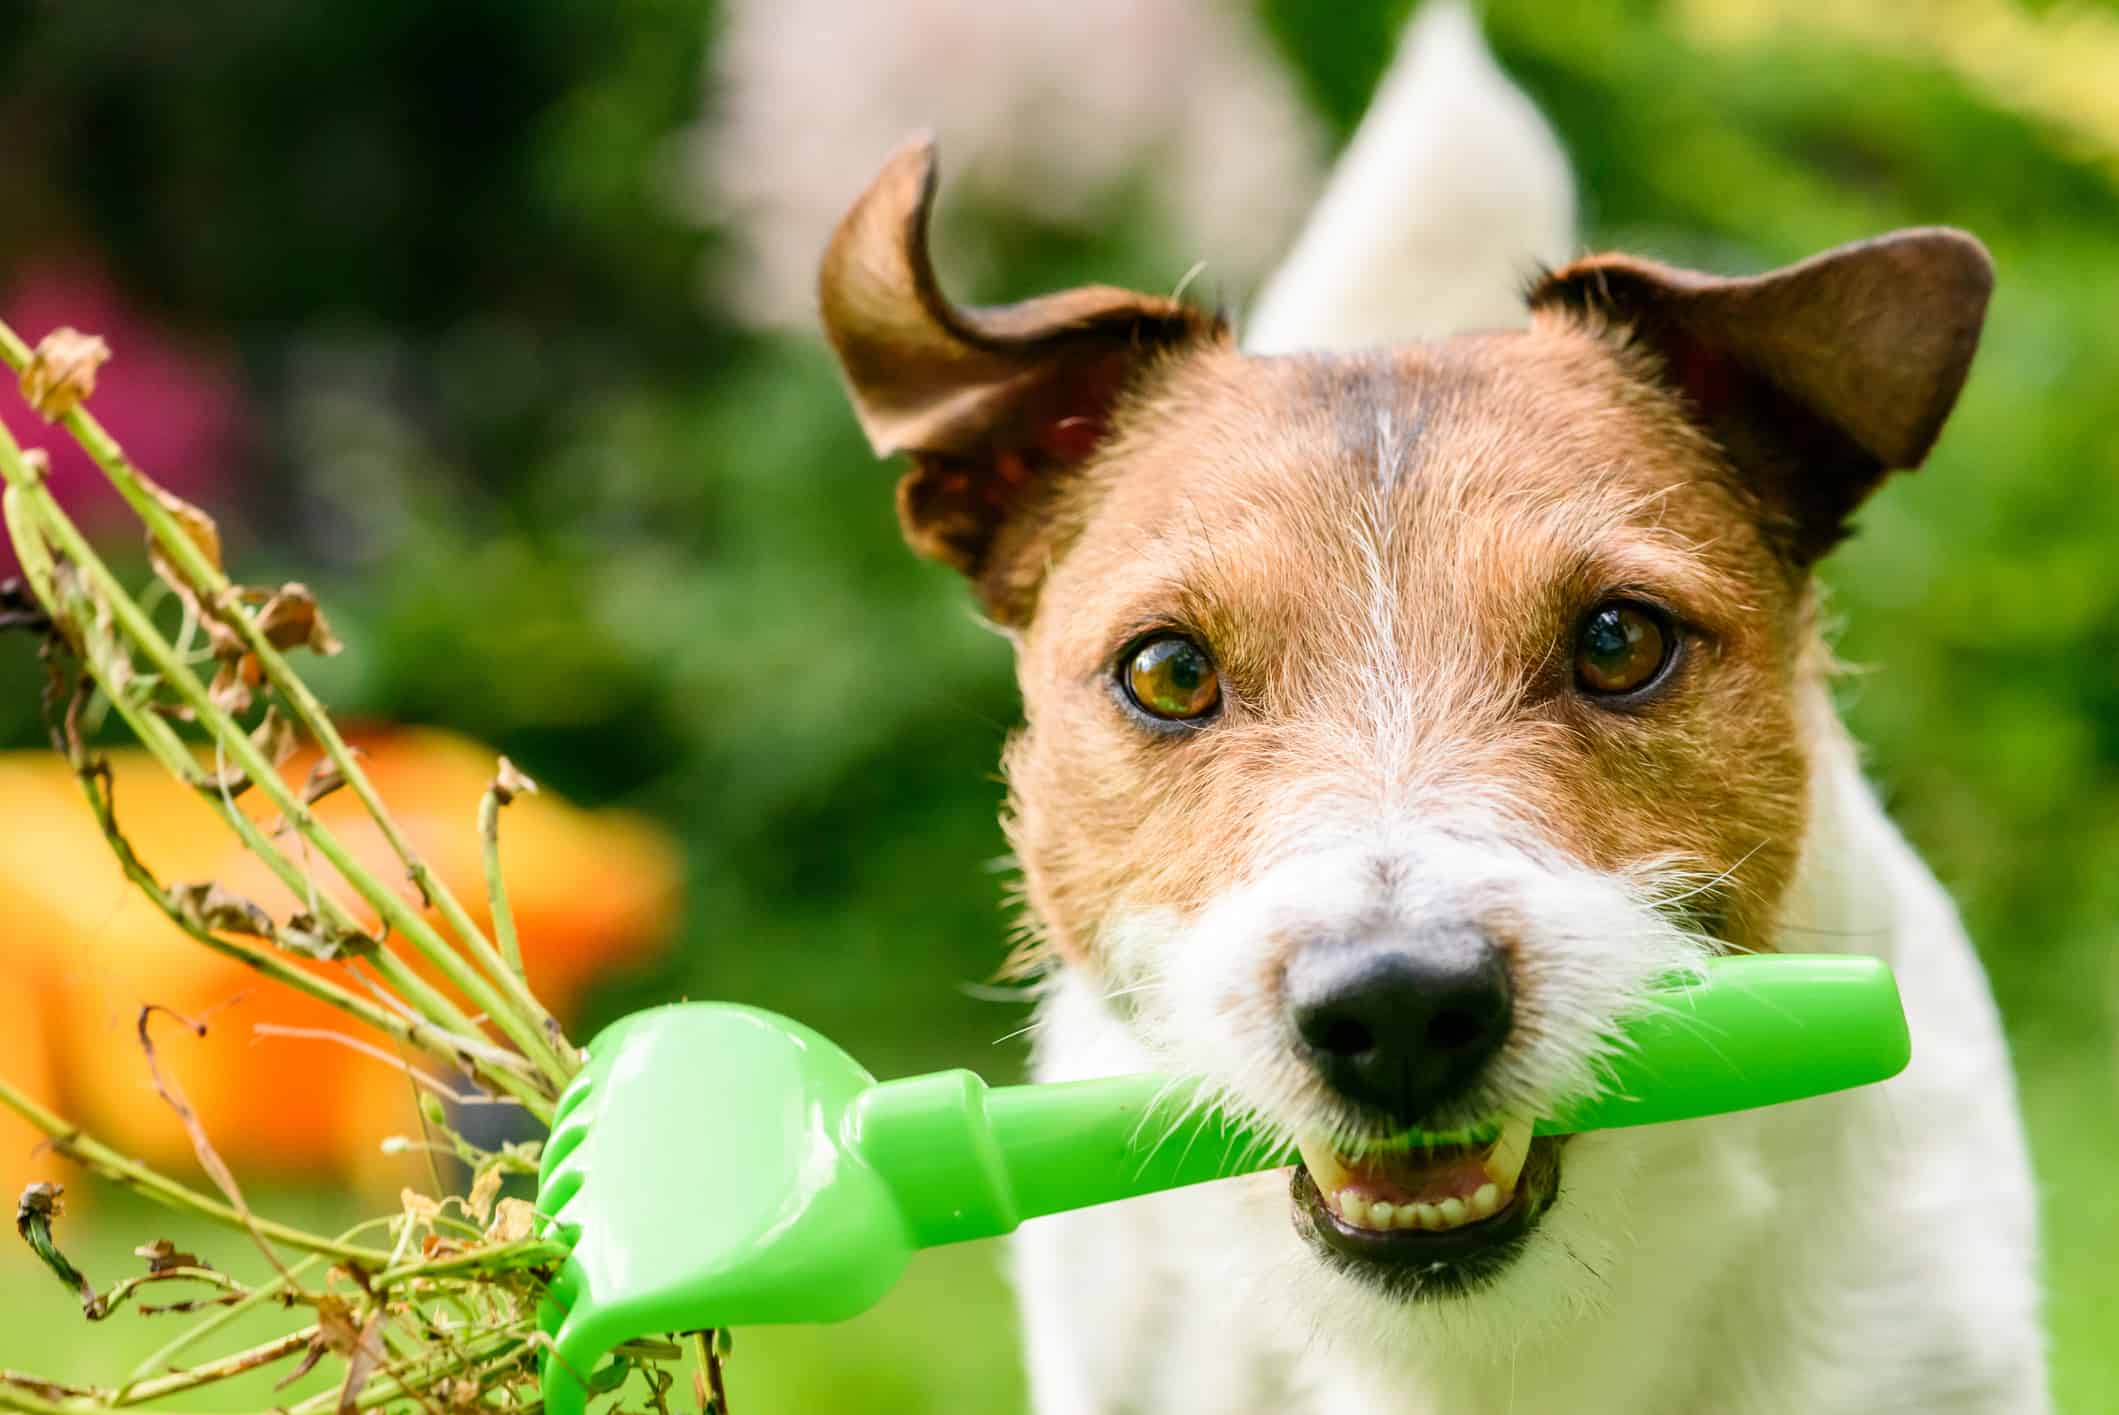 Choose a per-friendly weed killer for your pets